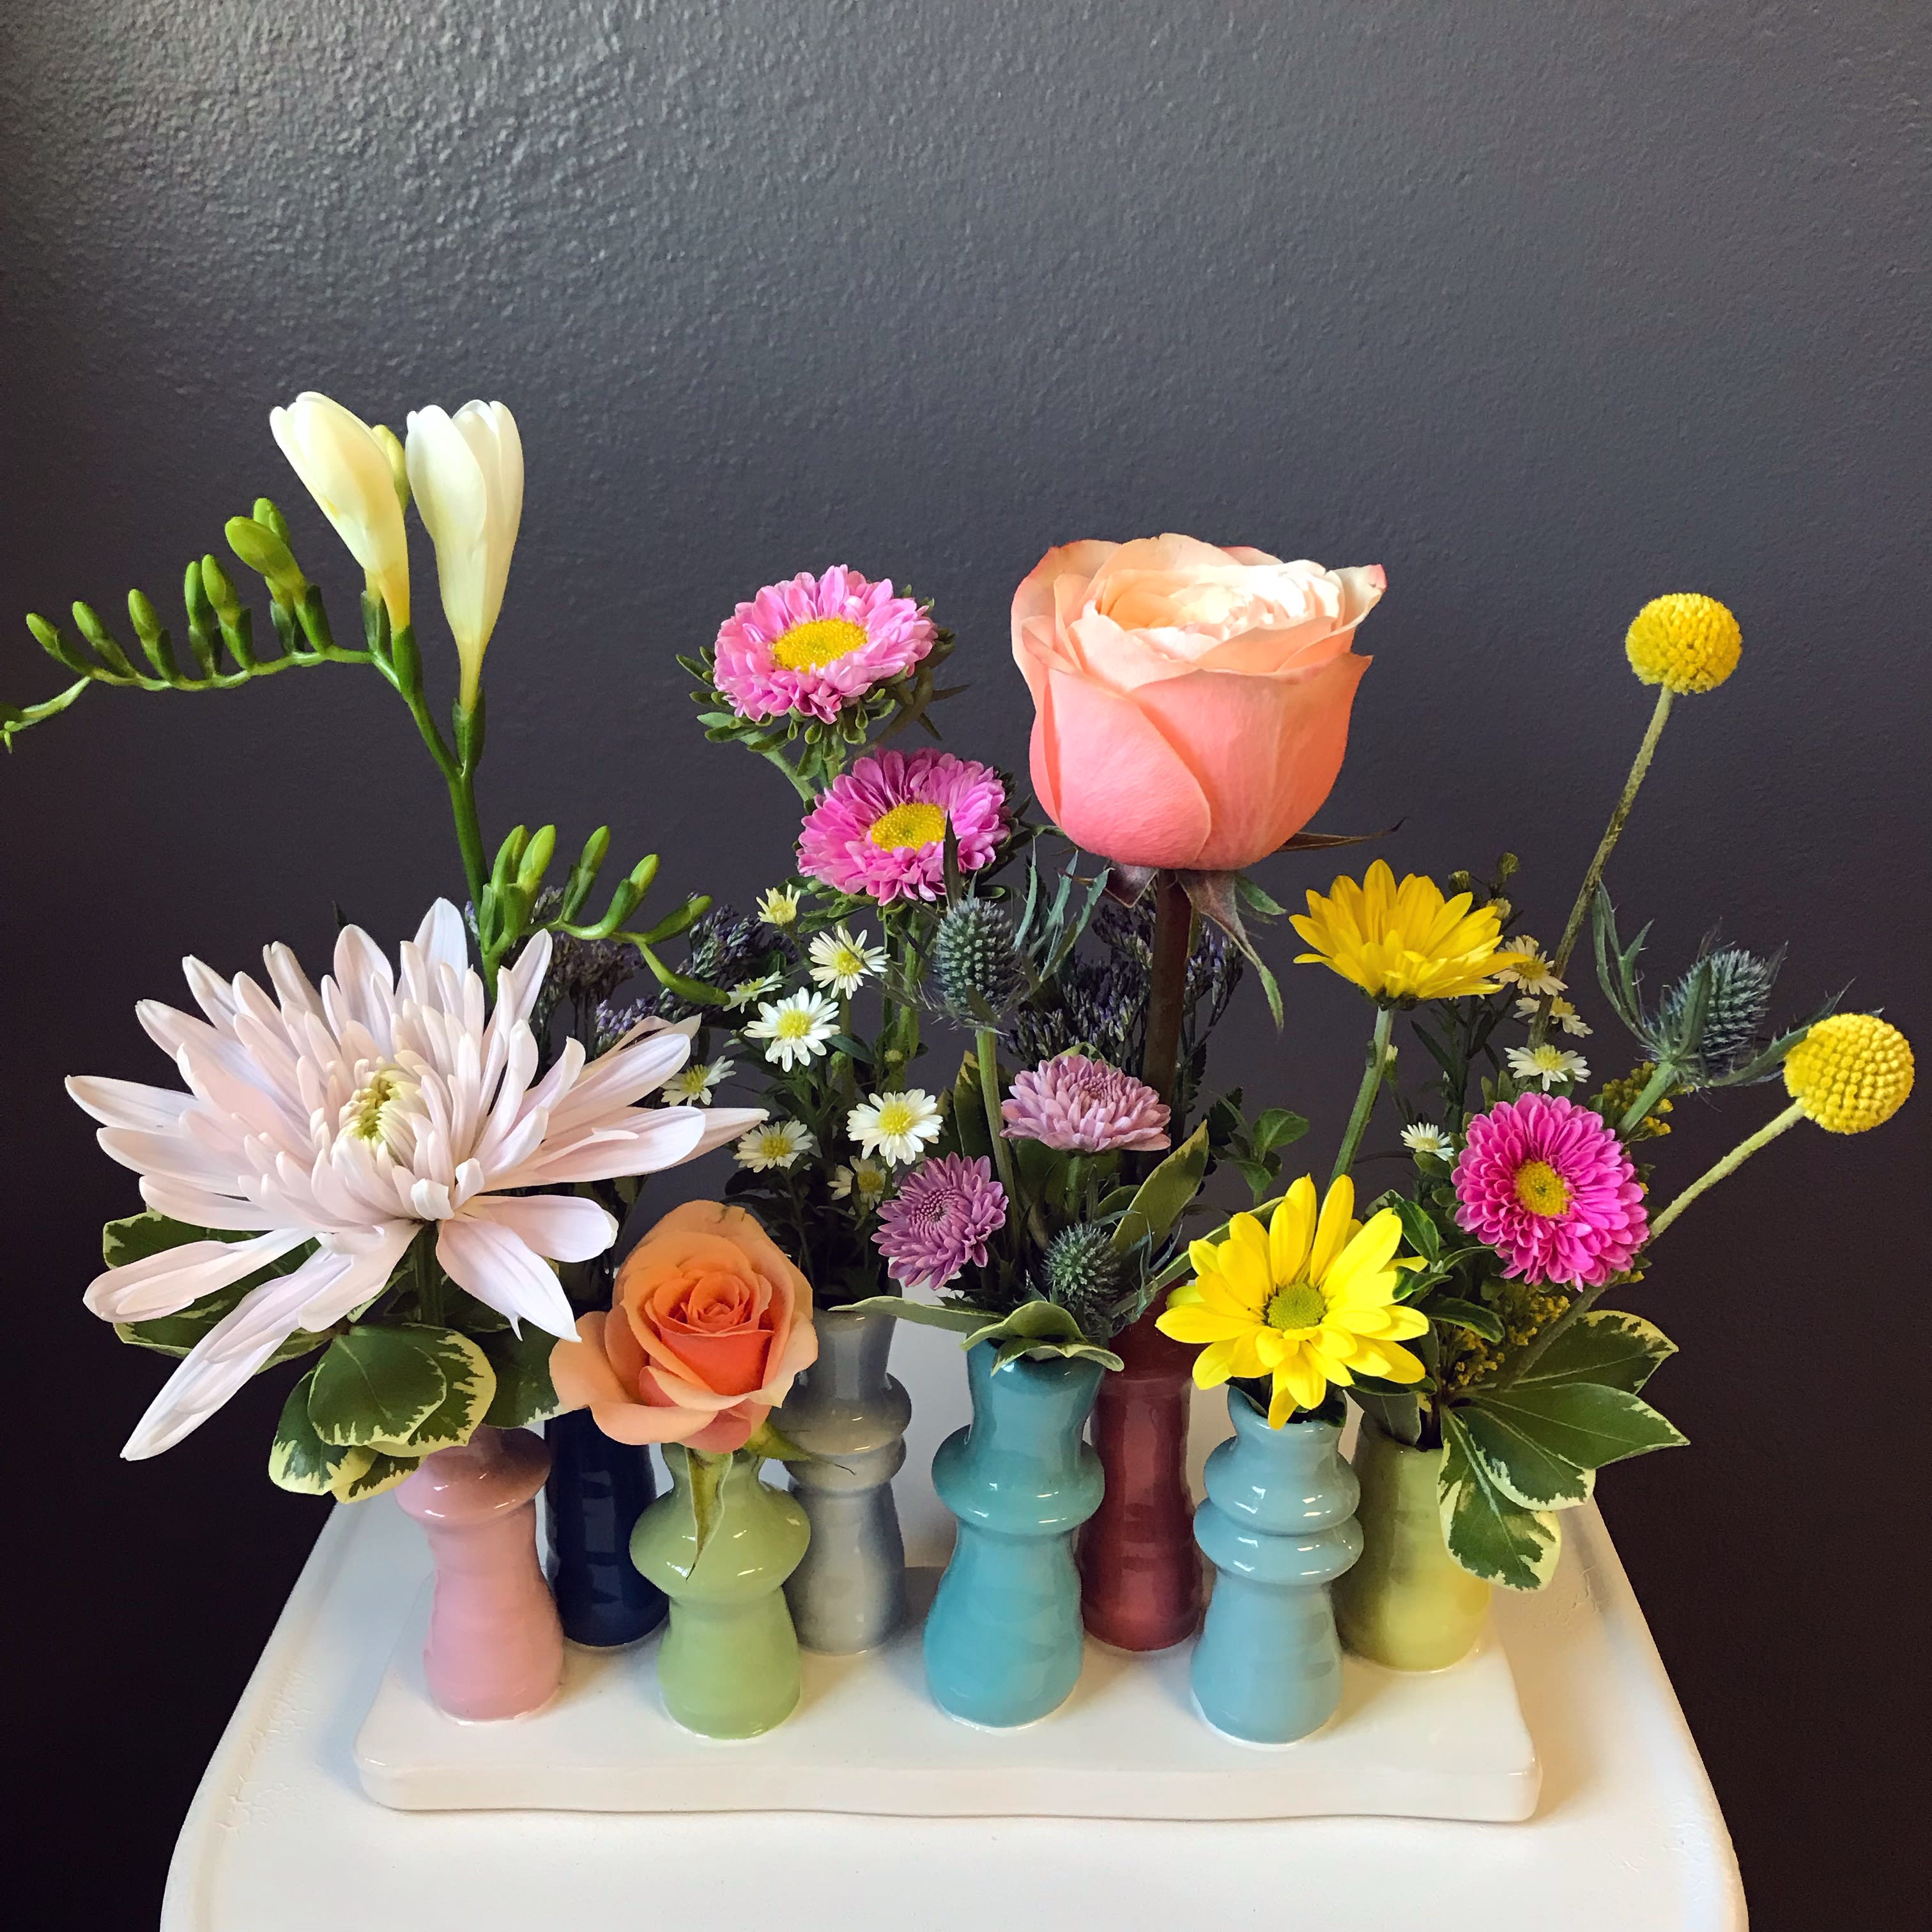 Molly Marie - A unique platform of colorful ceramic bud vases filled with cheery blooms. This fun arrangement is sure to bring a smile, and also makes for a great keepsake. Approximately 10&quot; wide x 12&quot; tall. 